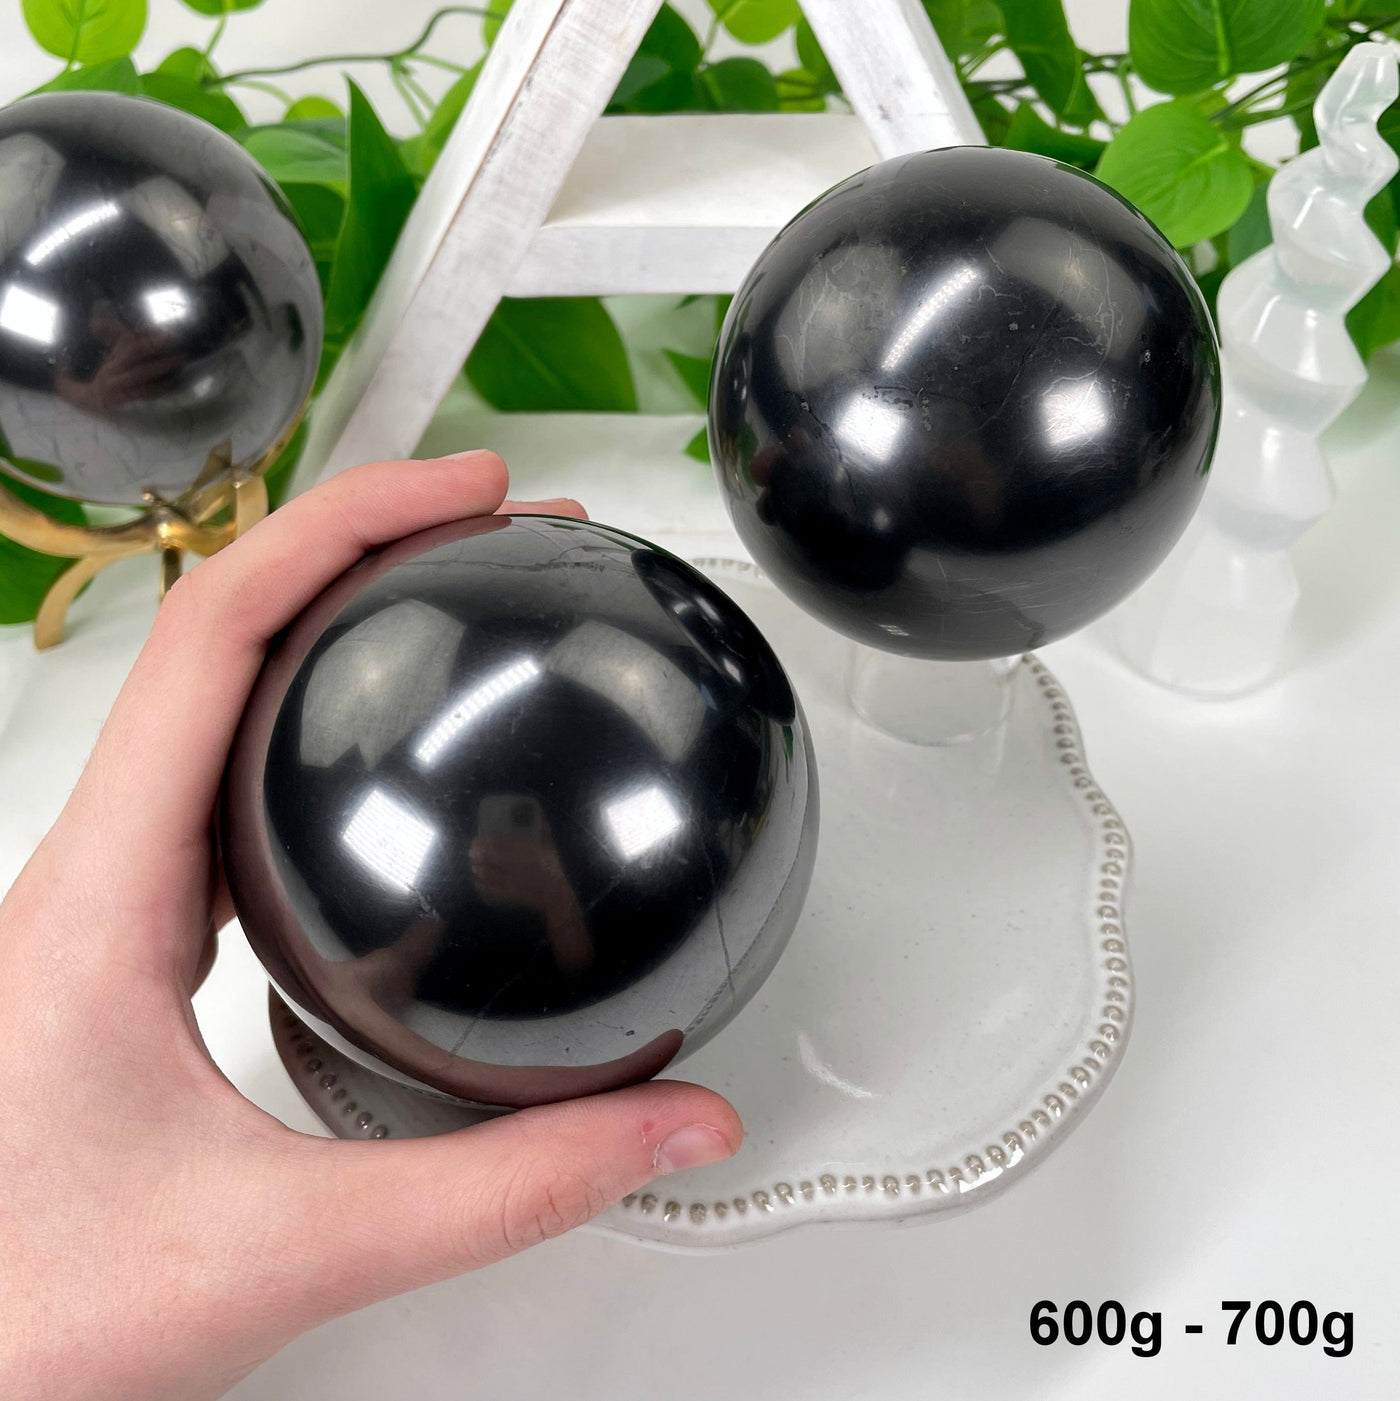 two 600g - 700g shungite polished spheres on display for possible variations with one in hand for size reference